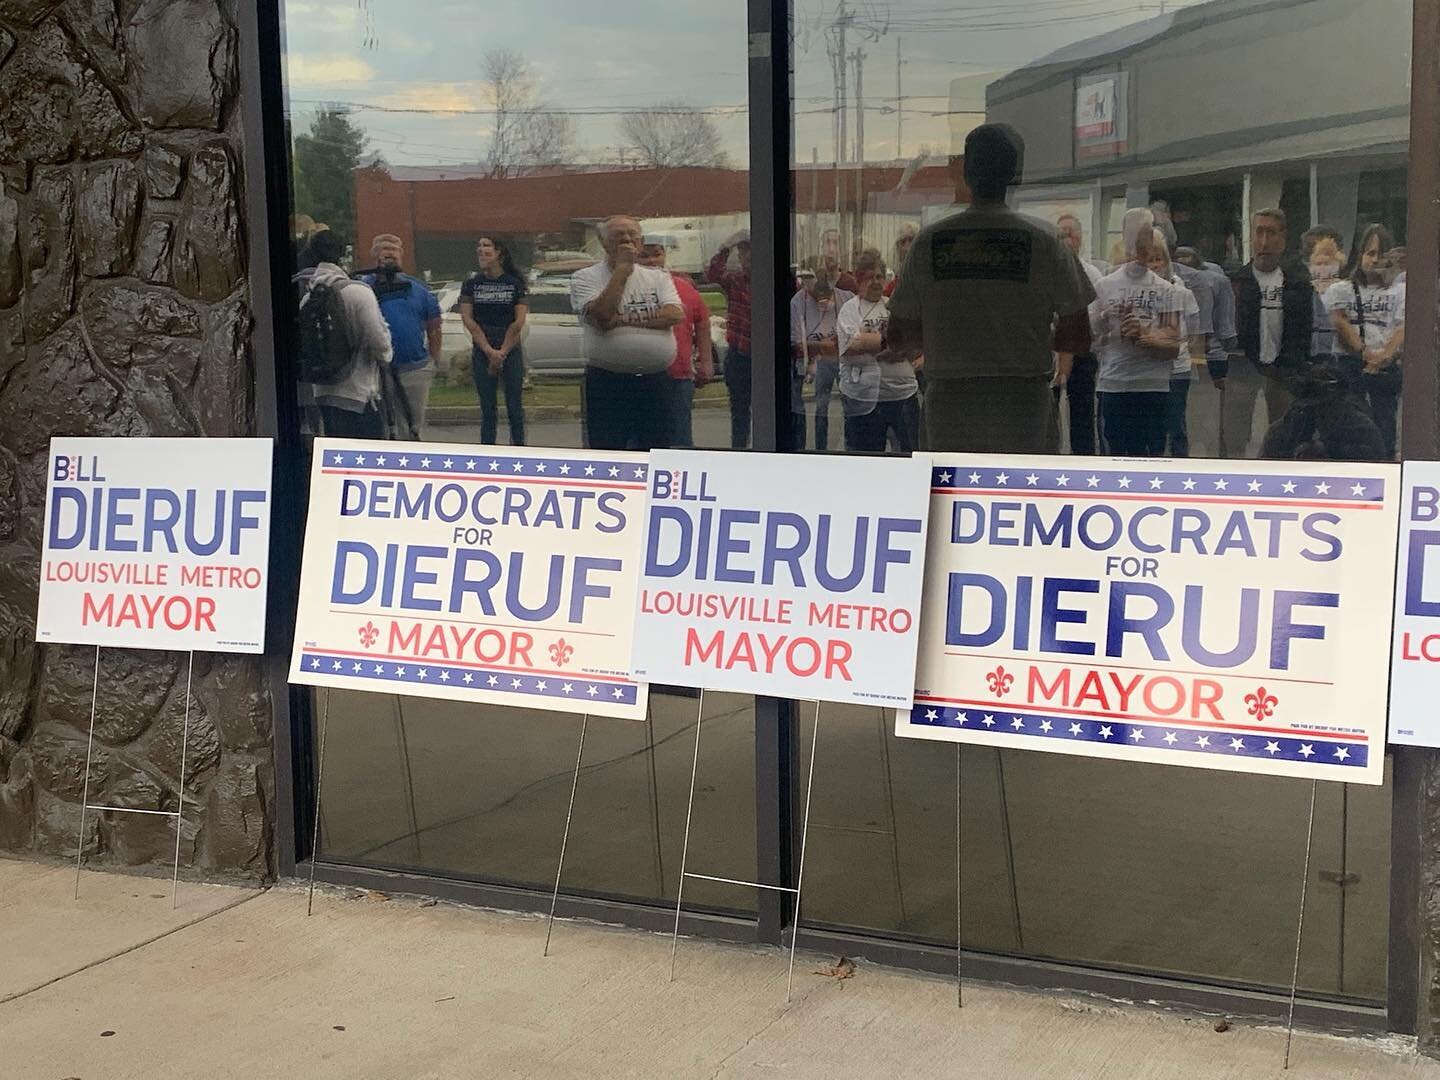 The show of support with Dieruf for Metro Mayor signs all over town really blew me away. Though we did not prevail, I want to thank everyone who chose to have a sign in their yard. You helped spread the word in a big way!

With the election over, we 